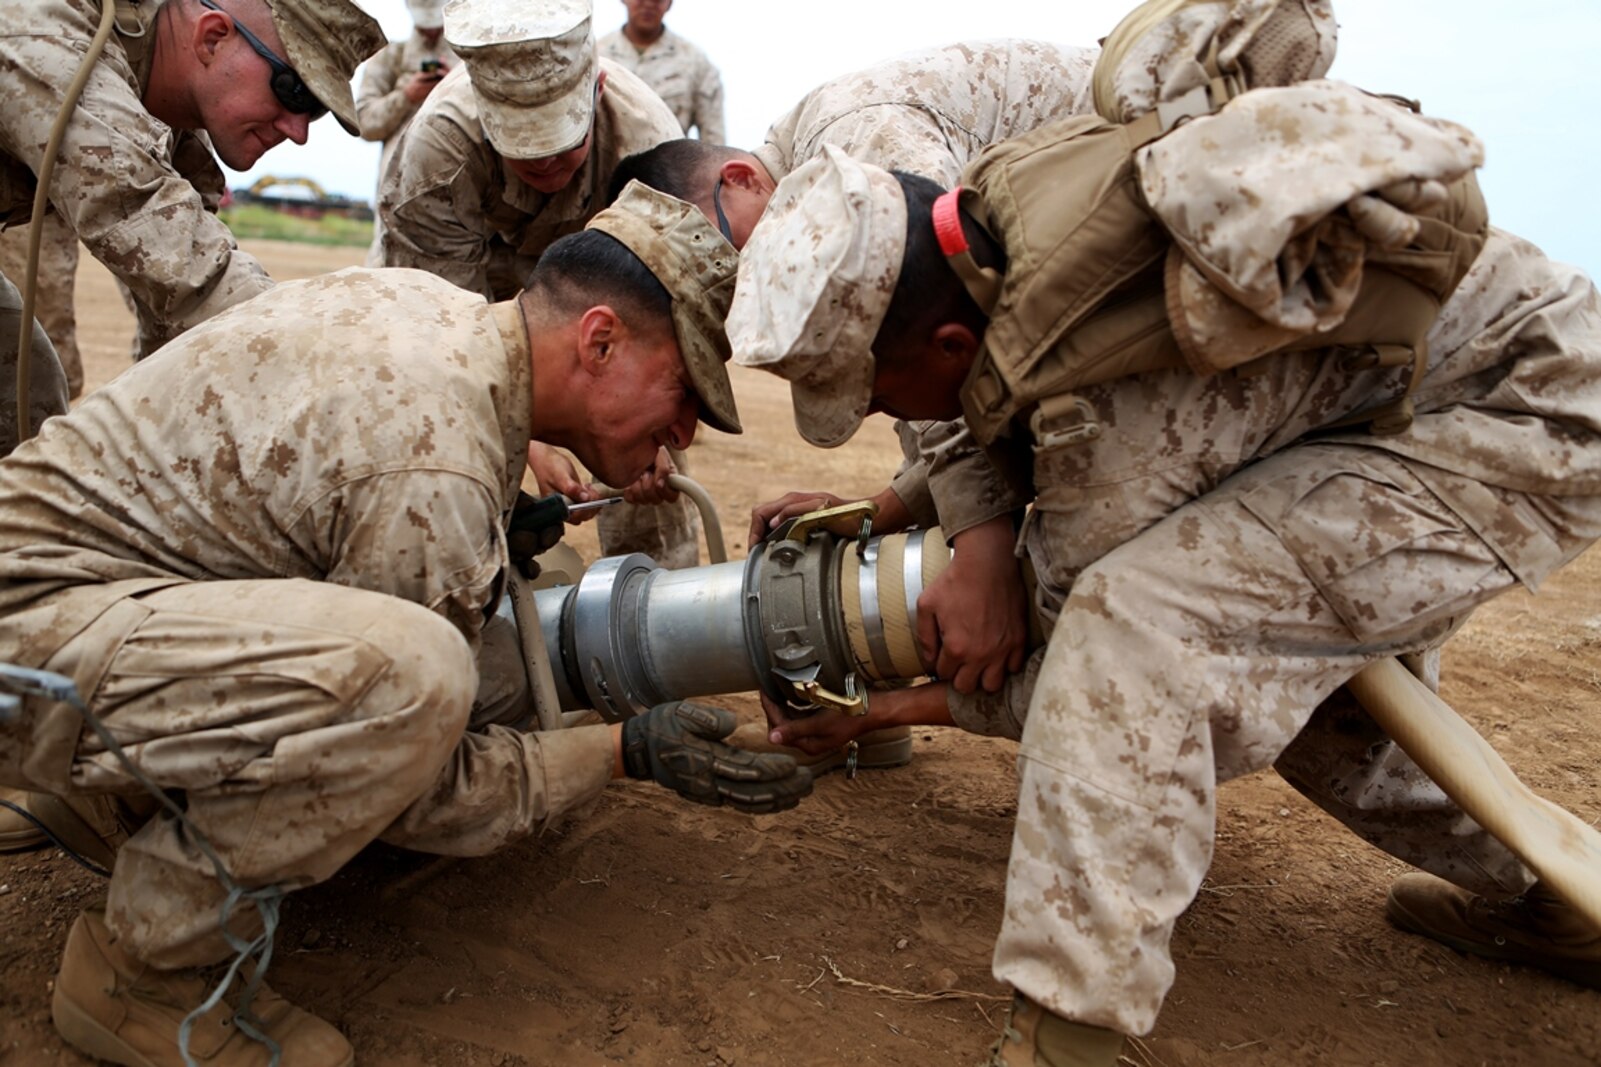 Bulk fuel and water purification Marines from 6th Engineer Support Battalion, 4th Marine Logistics Group, use an extension to make a connection between two four-inch discharge hoses during an annual training exercise aboard Camp Pendleton, Calif., June 13, 2016 to increase readiness and fulfill their yearly requirements as a reserve unit. 7th ESB, 1st Marine Logistics Group, supported their reserve counterparts with the gear necessary to pump water nearly 3 miles from the ocean at Red Beach to a training area where they practiced setting up and maintaining massive stores of water. (U.S. Marine Corps photo by Sgt. Carson Gramley/released)